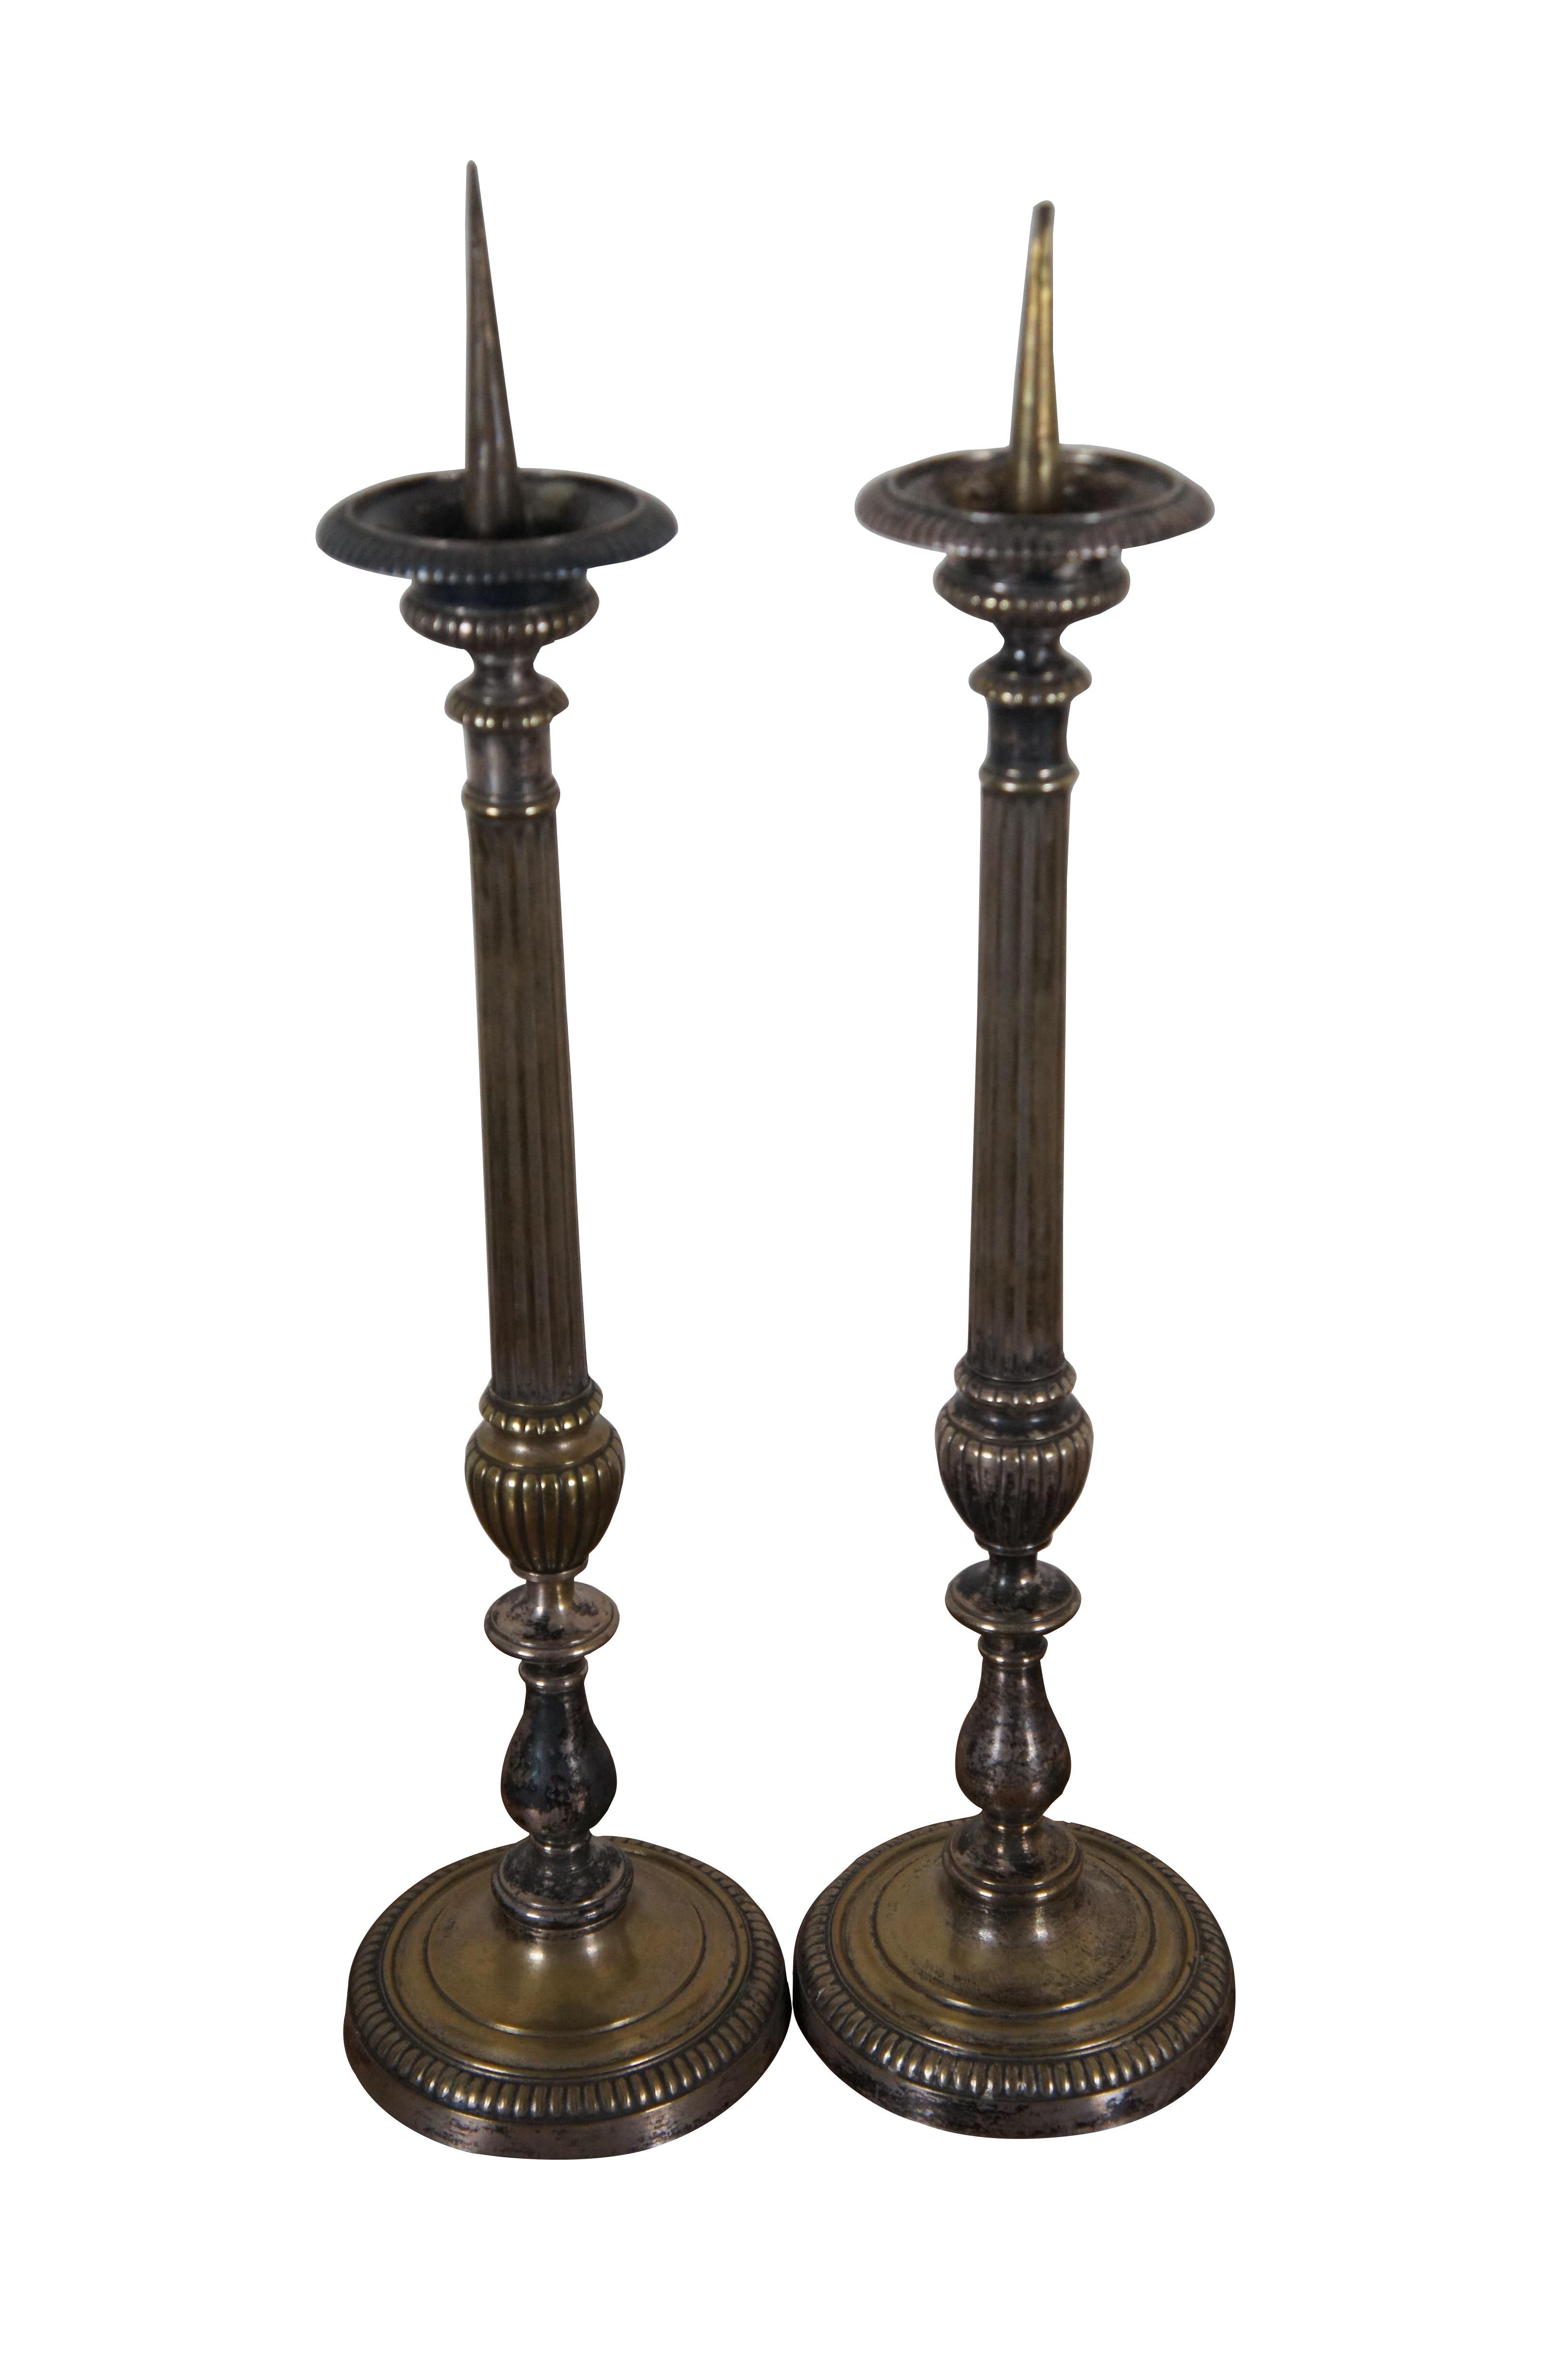 Two antique French Louis XVI style silverplate mantel or floor prickets / candlesticks / candle holders featuring a tall reeded column with trophy urn form pedestal base.

In the history of religion, light and fire have frequently accompanied the